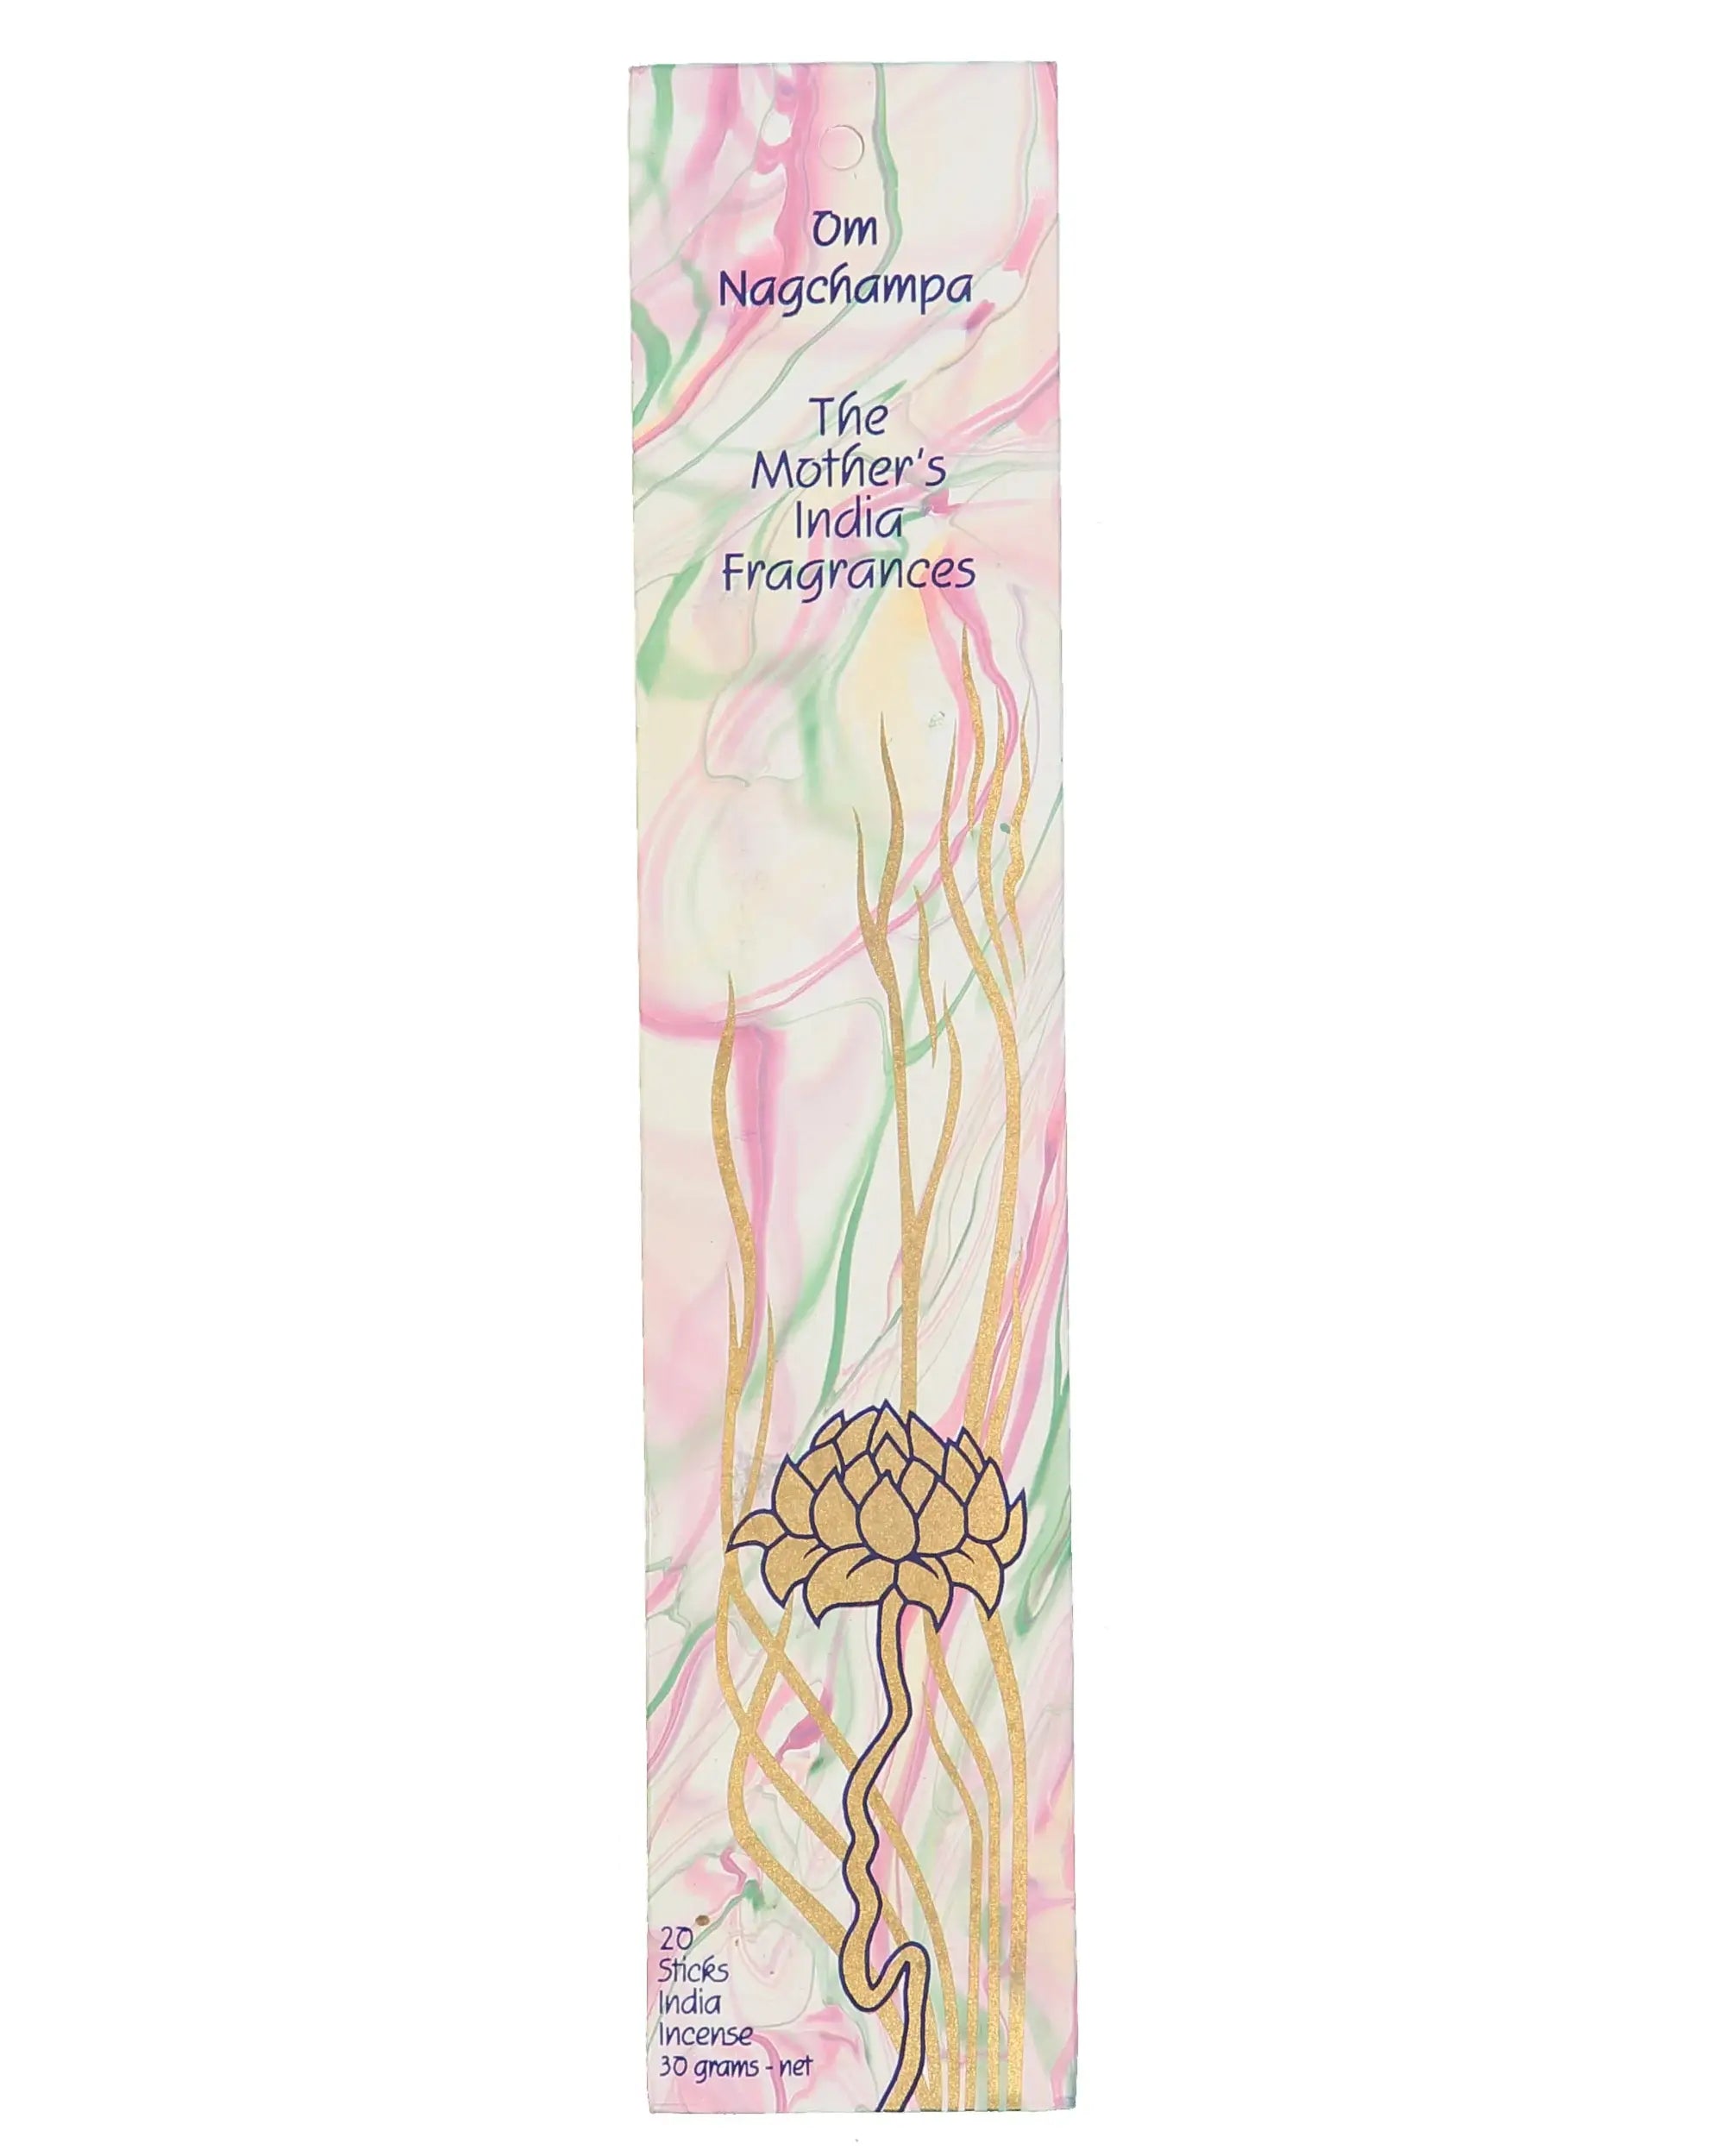 Om Nagchampa Real Incense by The Mother's India Fragrances Tantrika Australia